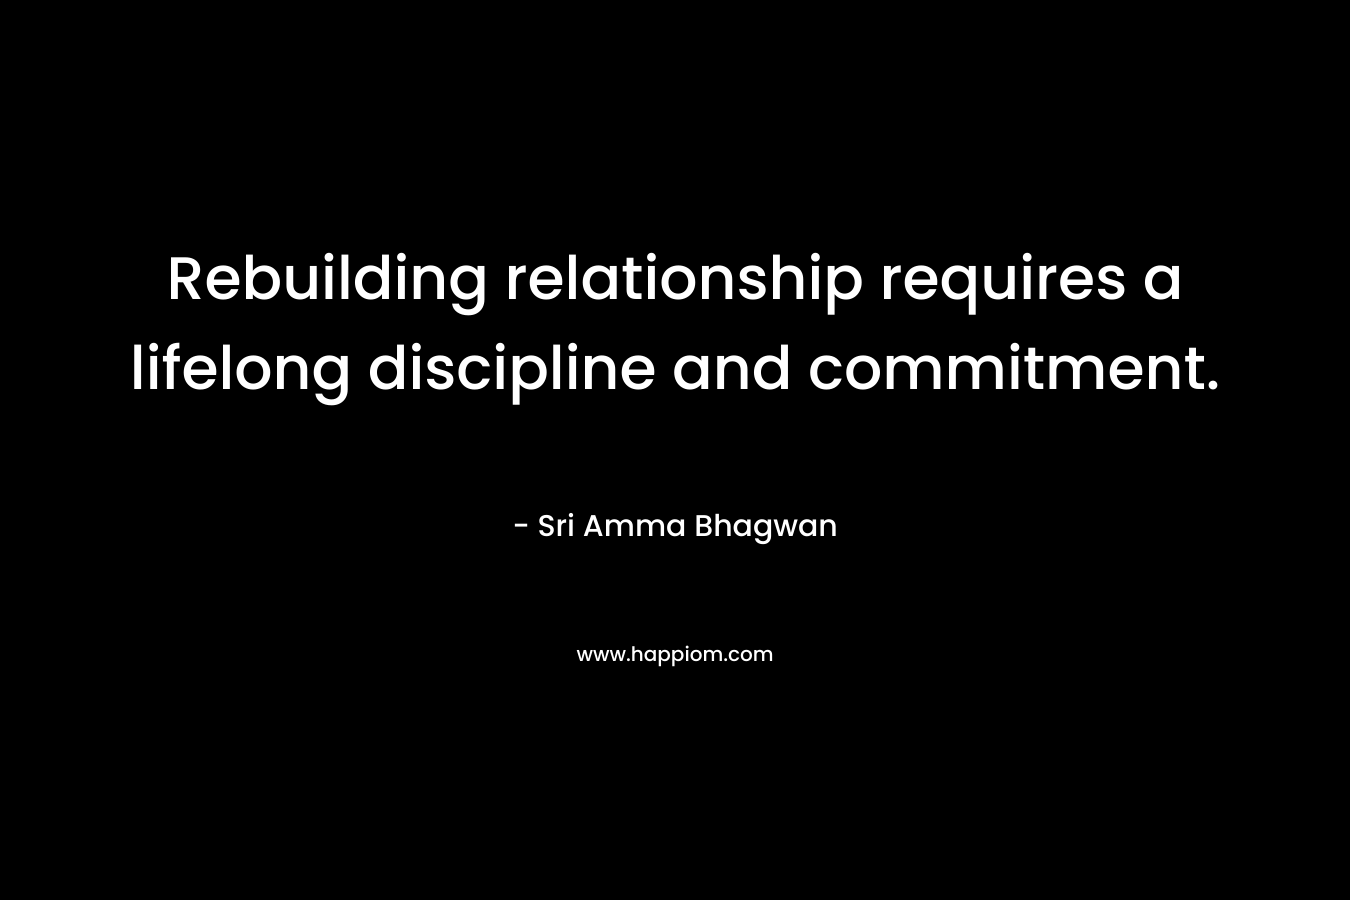 Rebuilding relationship requires a lifelong discipline and commitment.